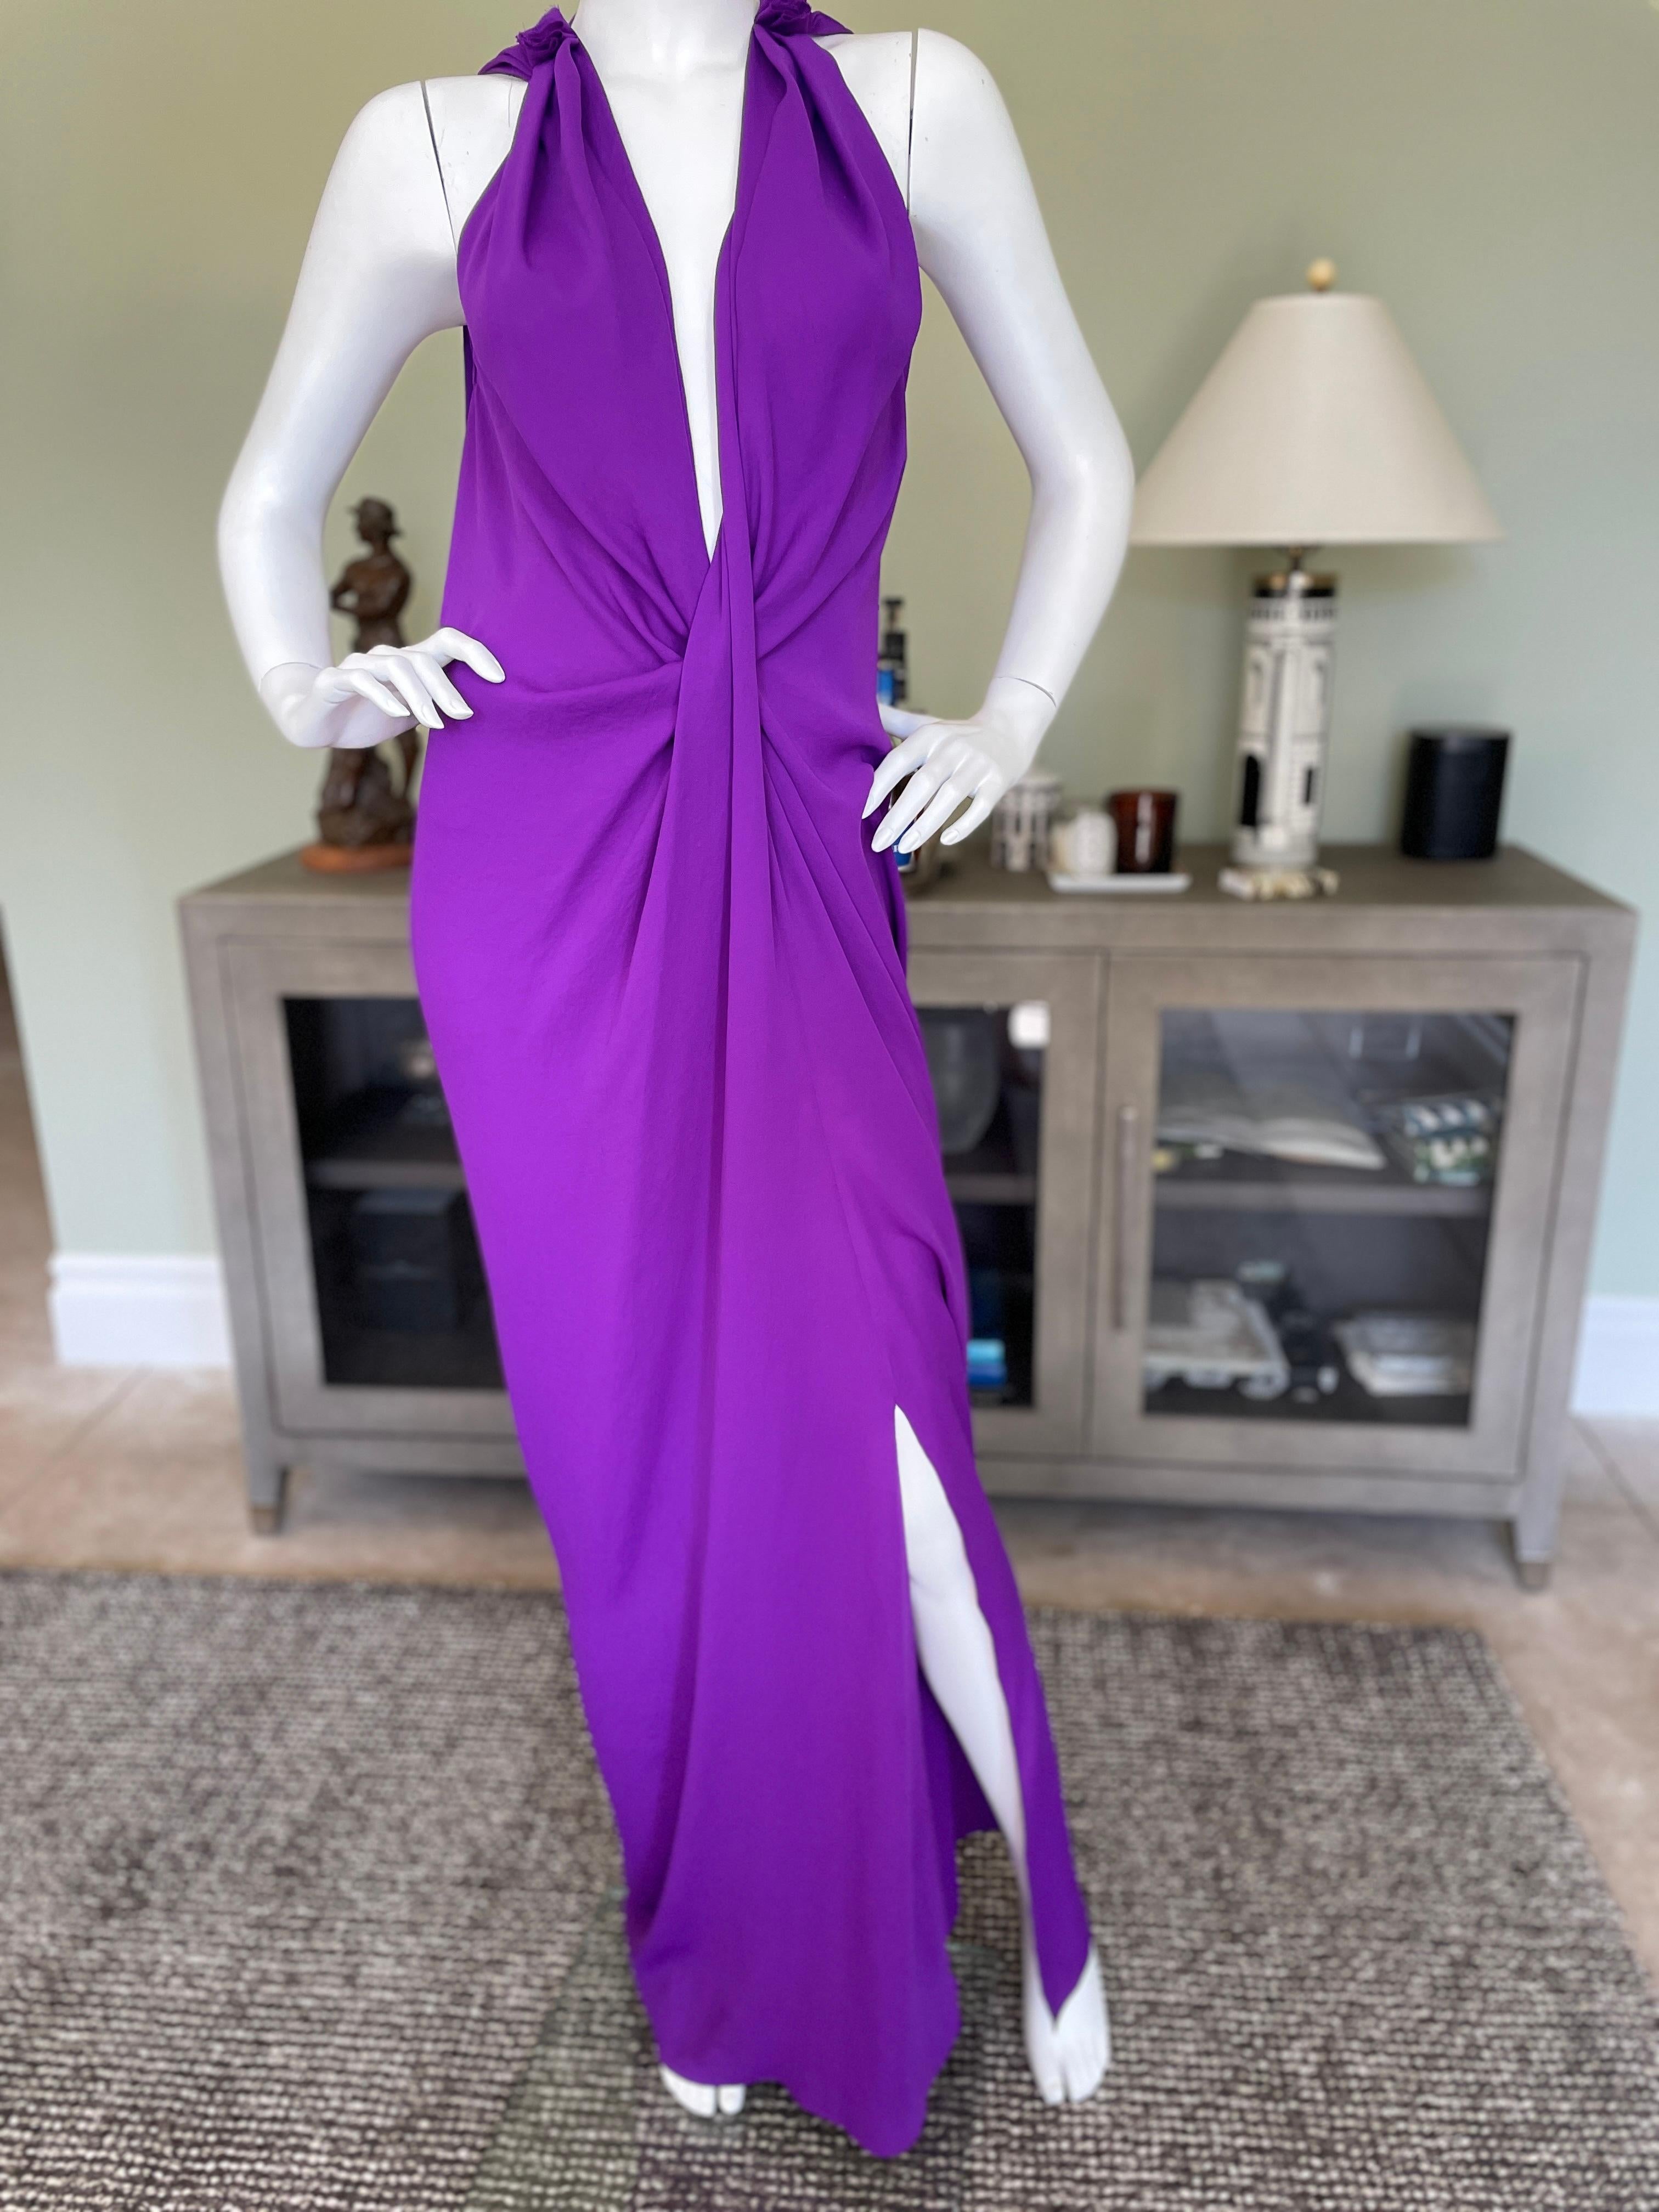  Lanvin by Alber Elbaz 2014 Plunging Purple Evening Dress with High Slit For Sale 5